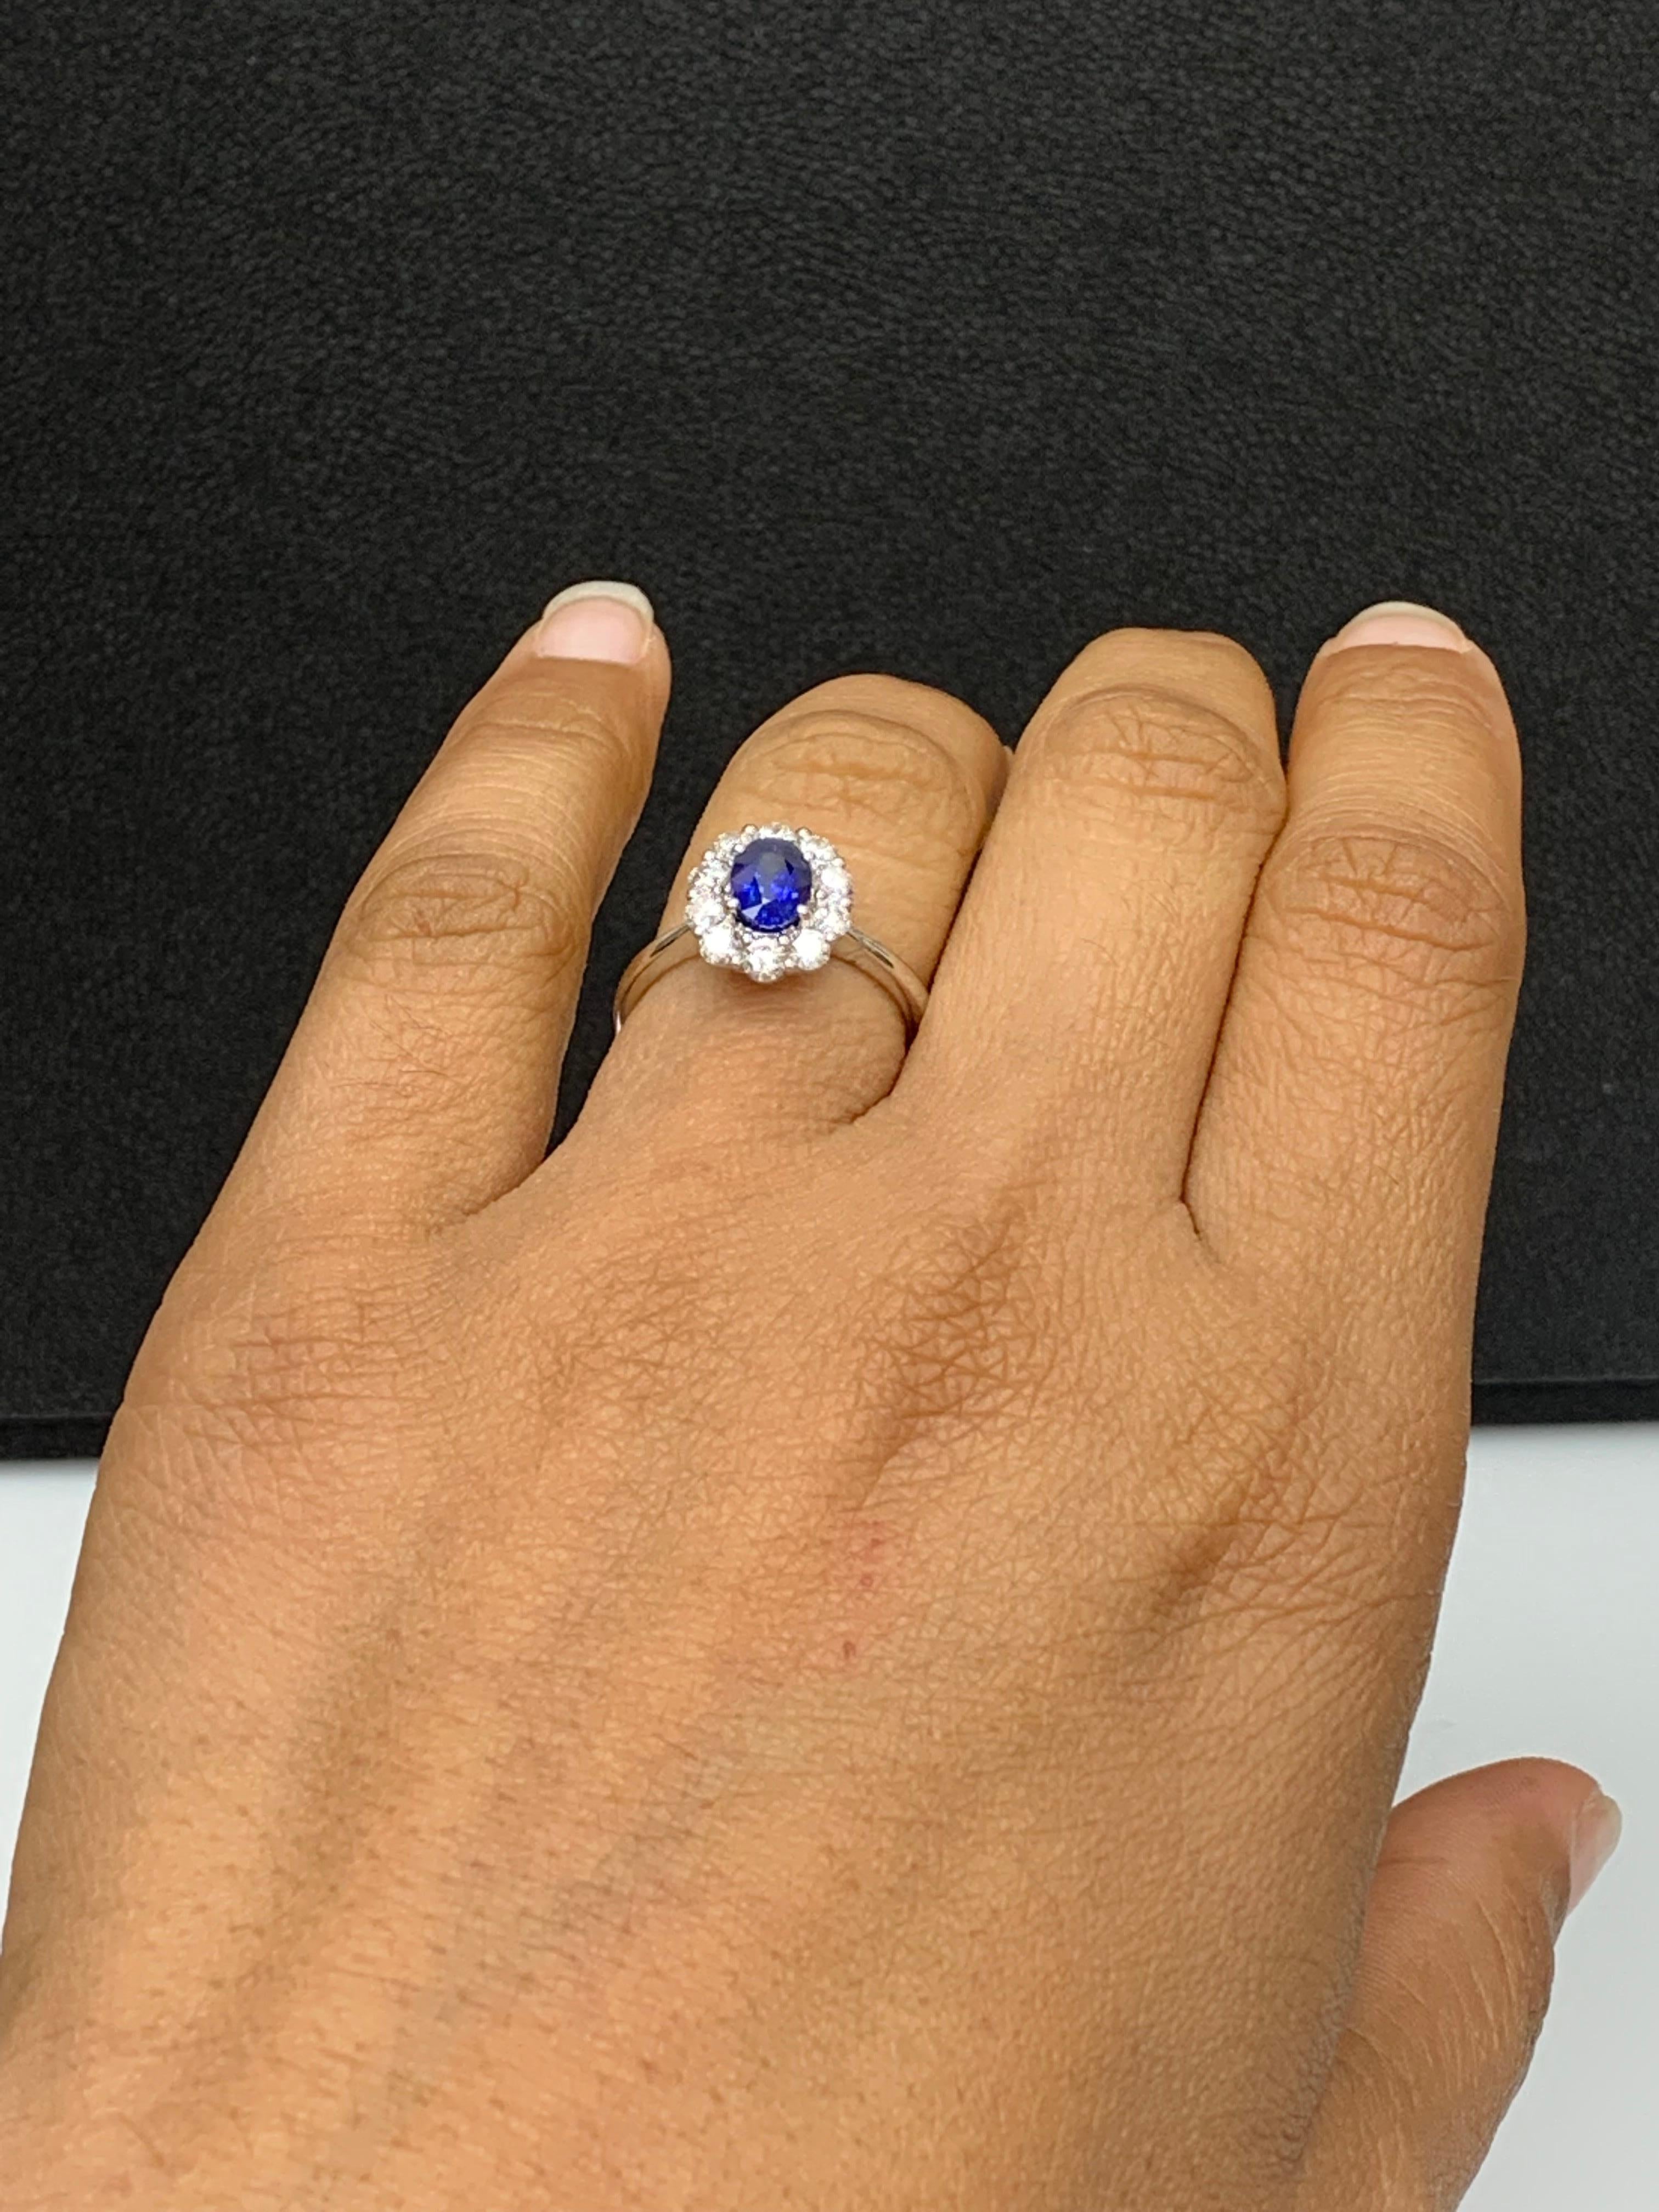 0.91 Carat Oval Cut Blue Sapphire and Diamond Ring in 18k White Gold For Sale 2